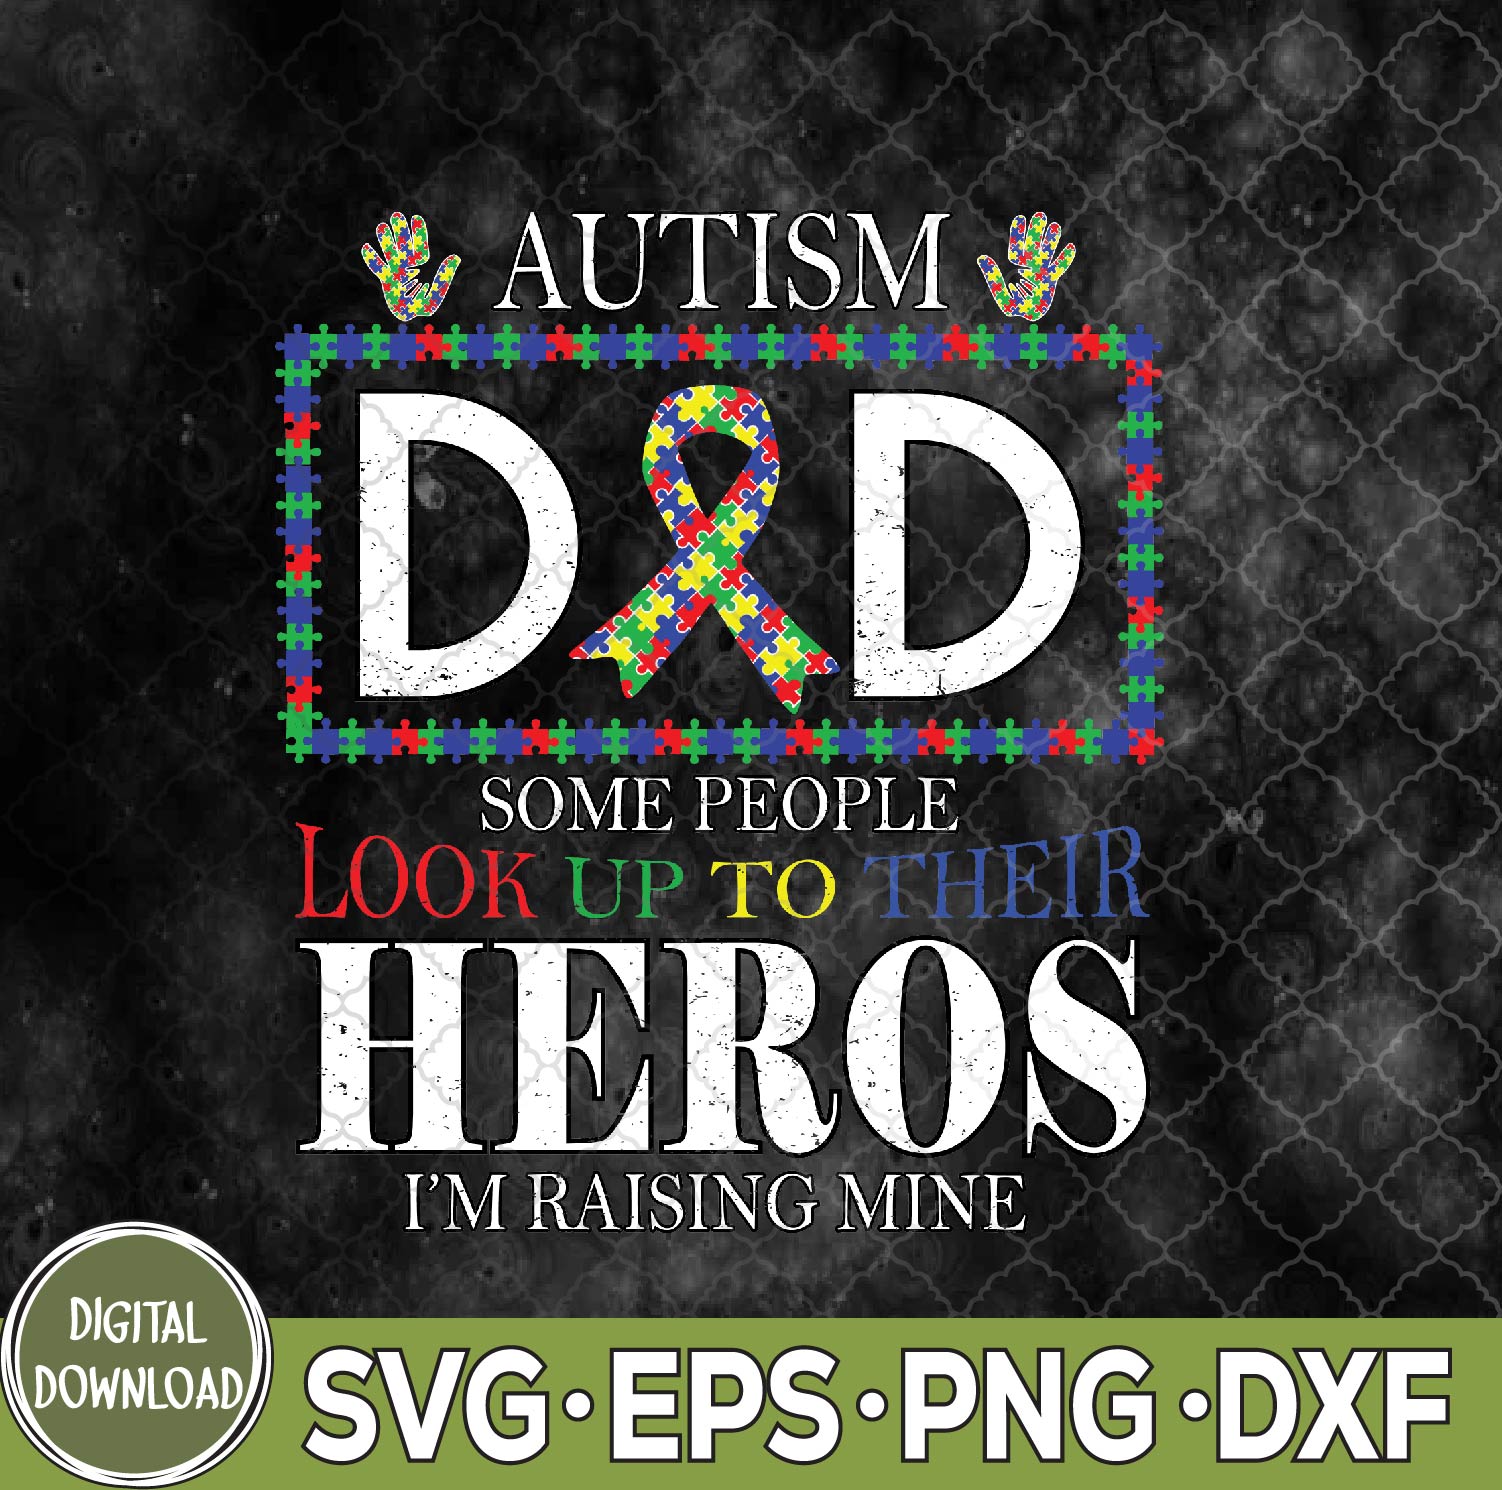 WTMNEW9file 09 127 Autism Dad Some People Look Up To Their Heroes Autism svg, Dad svg, Look Up To svg, Their Heroes svg, Svg, Eps, Png, Dxf